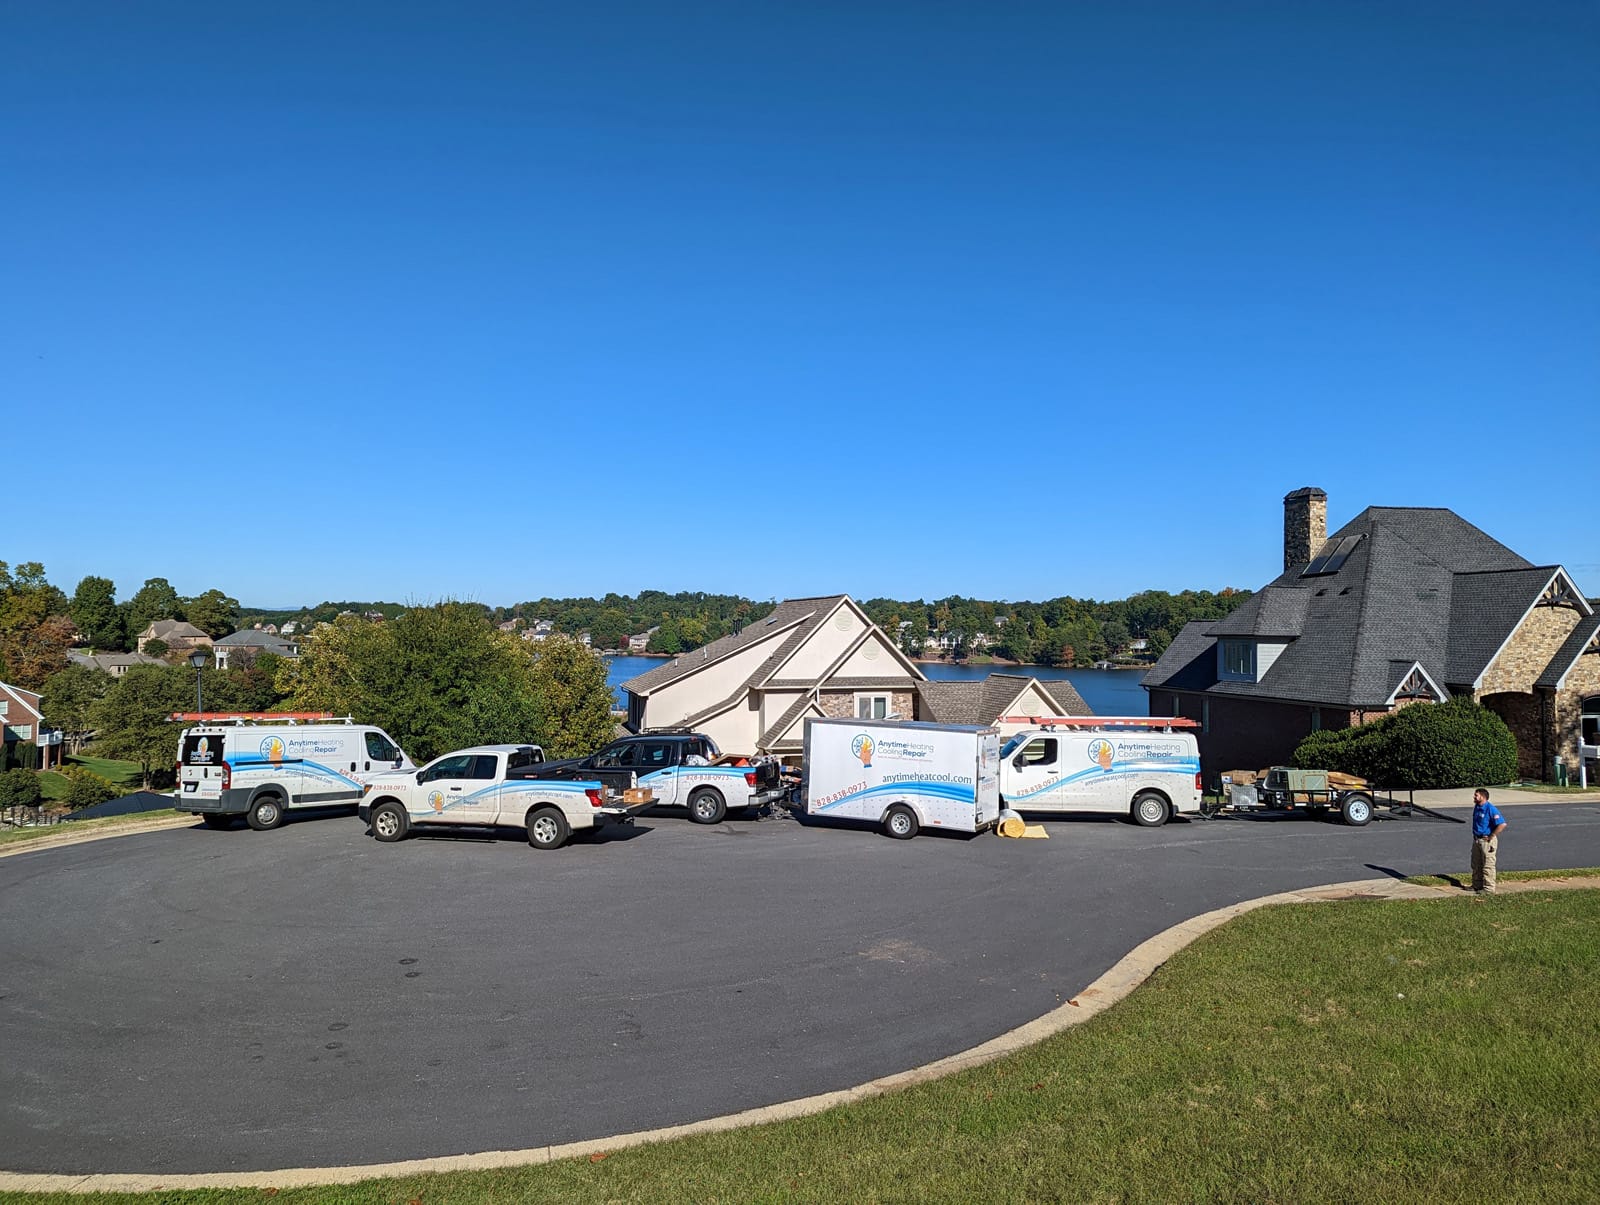 HVAC service vehicles parked in front of suburban homes on a clear day.